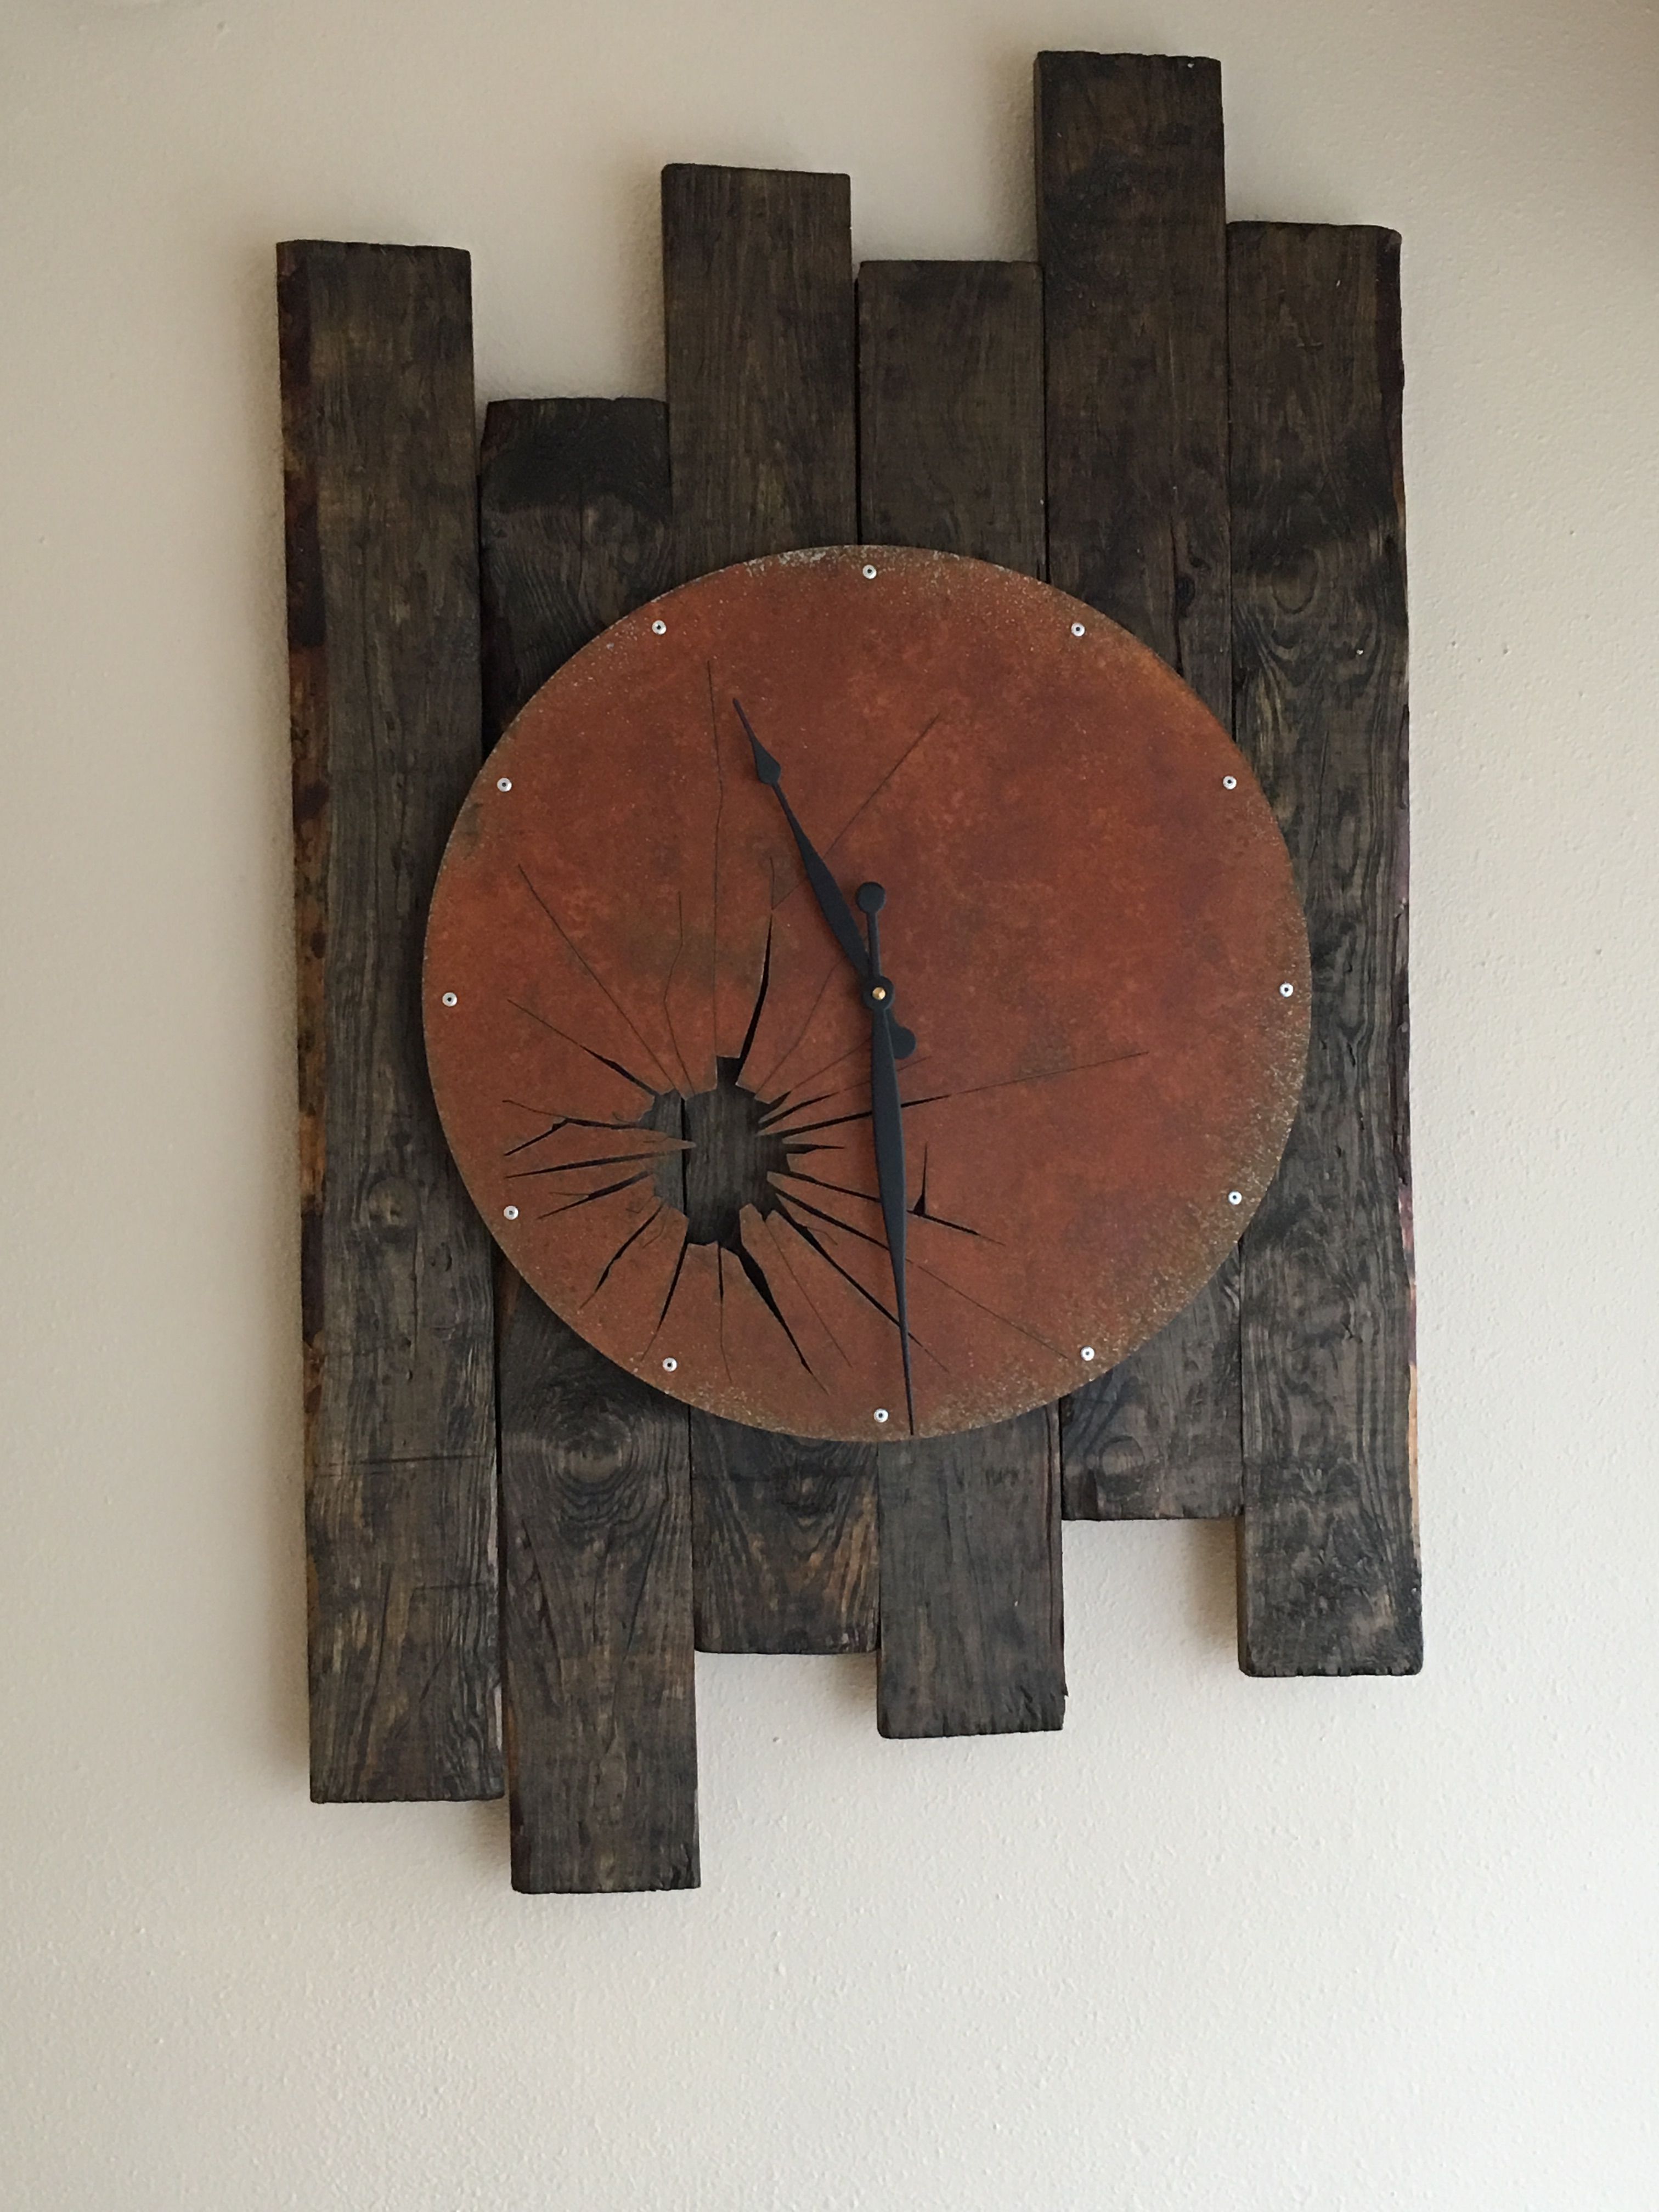 Distressed Wood Plank Wall Art With Clock (View 19 of 20)